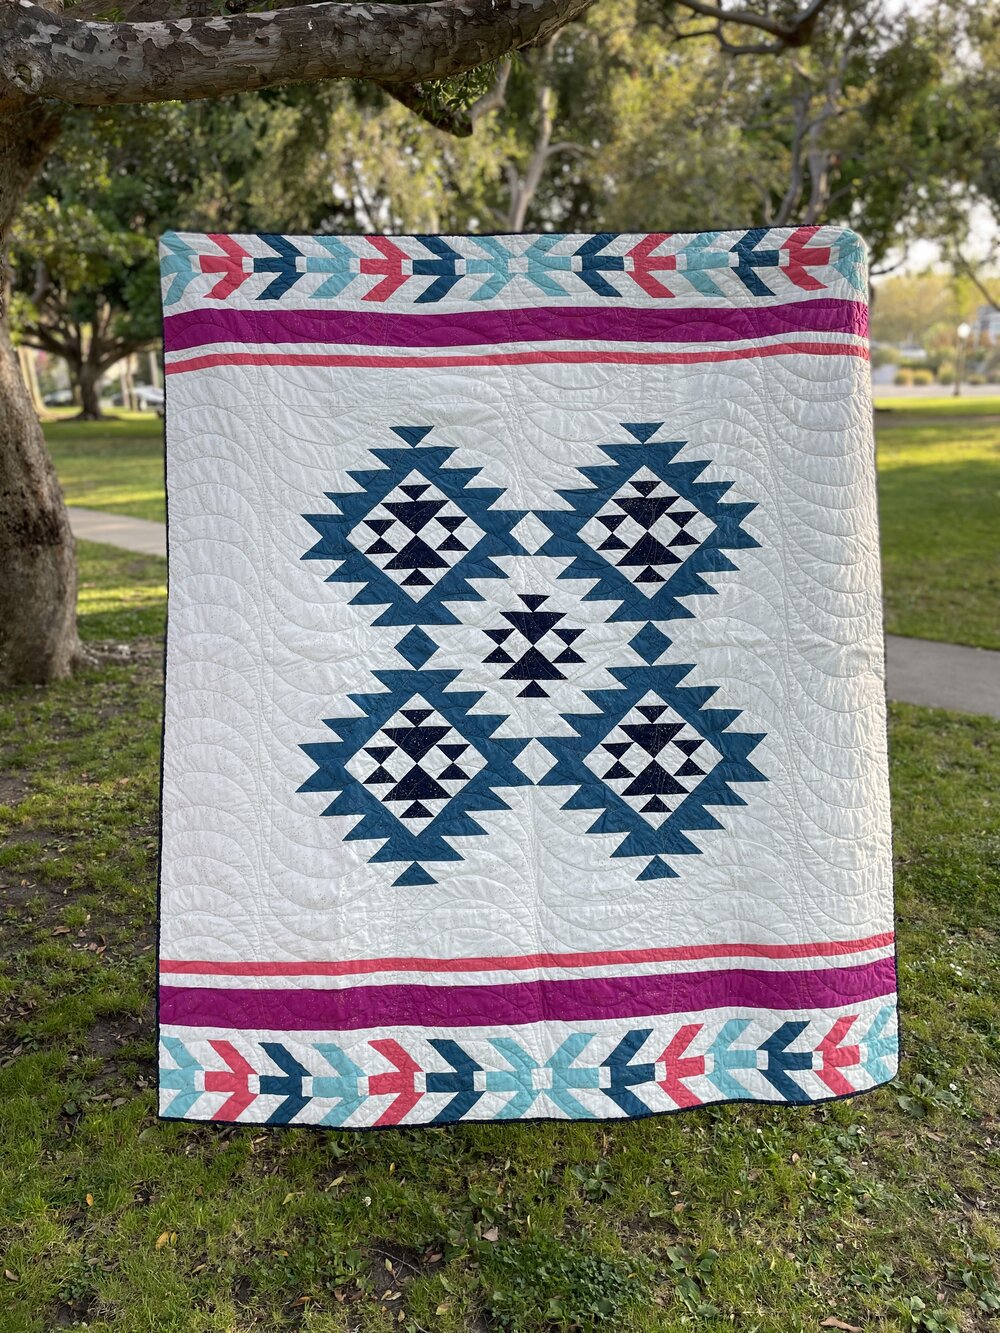 By Lisa of @thequiltdr